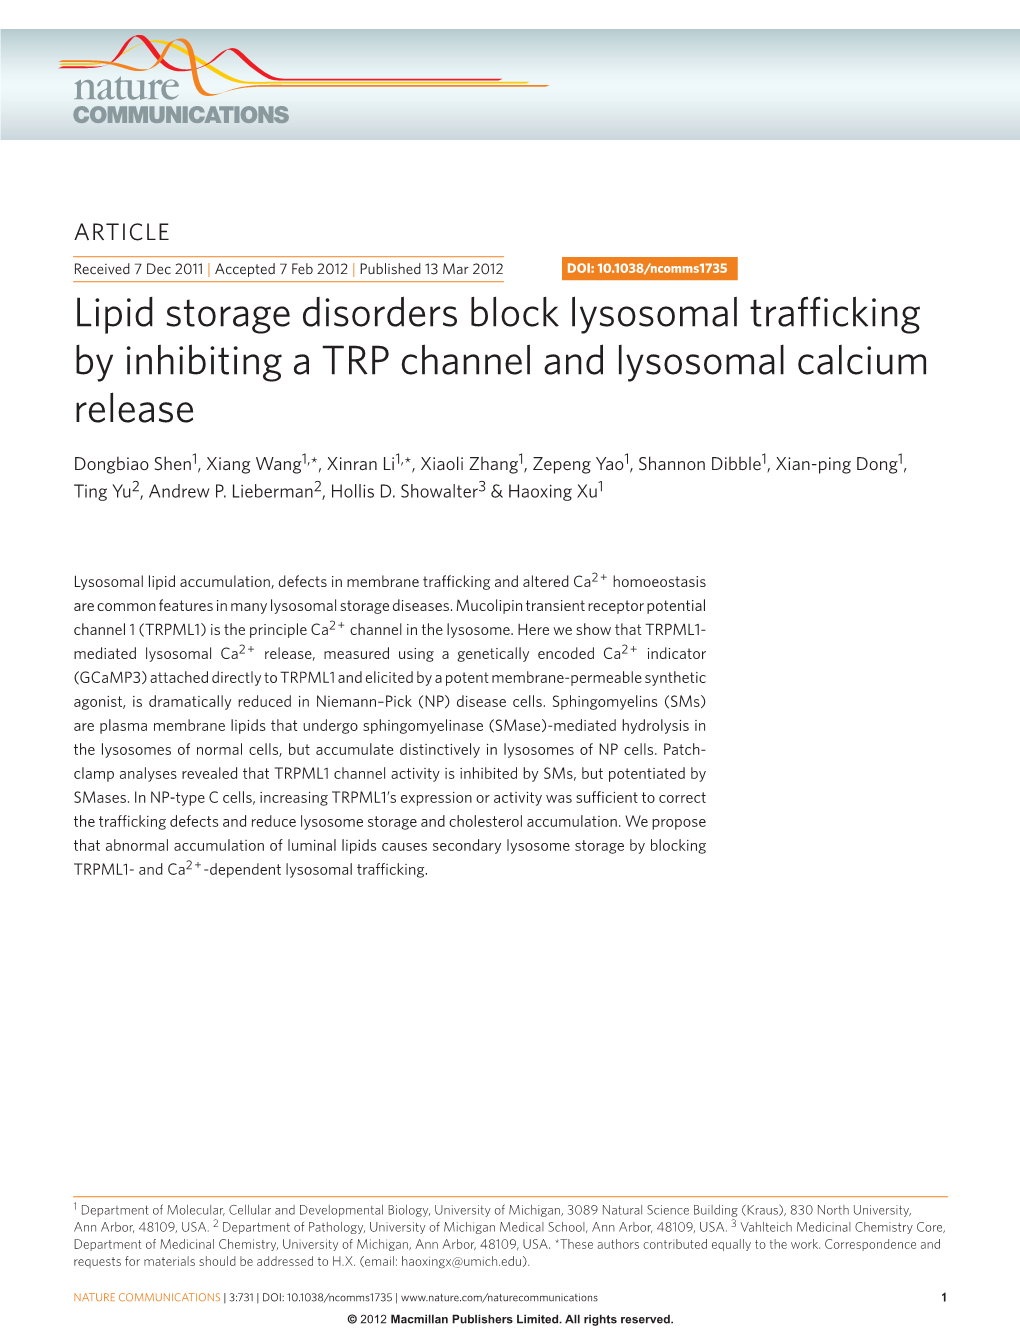 Lipid Storage Disorders Block Lysosomal Trafficking by Inhibiting a TRP Channel and Lysosomal Calcium Release